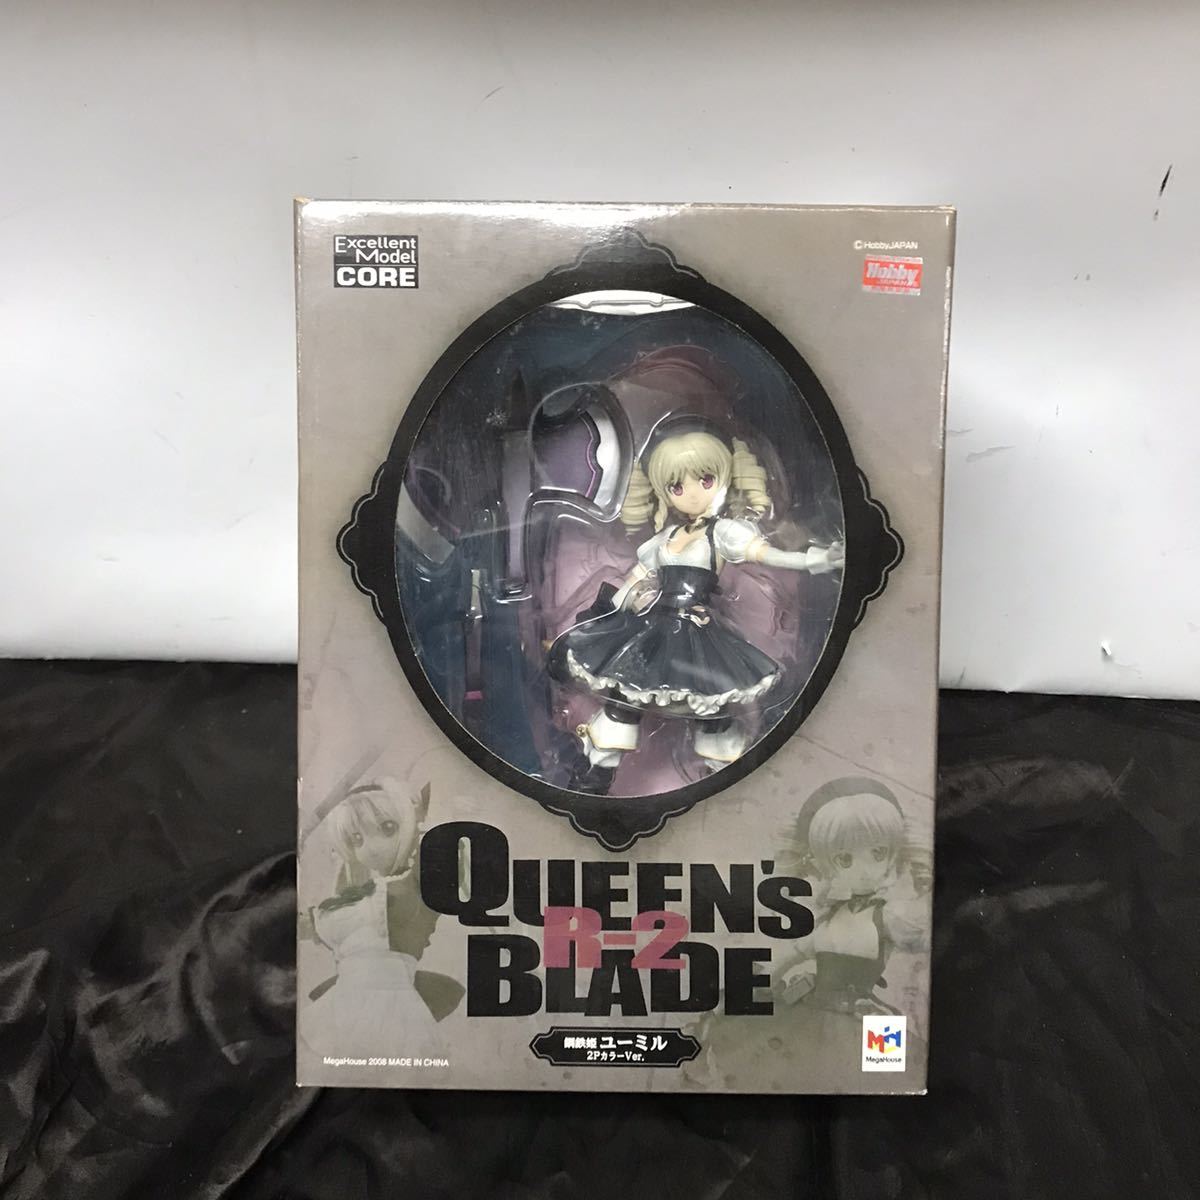  mega house steel iron . You Mill 2P color Ver. excellent model CORE Queen's Blade R-2